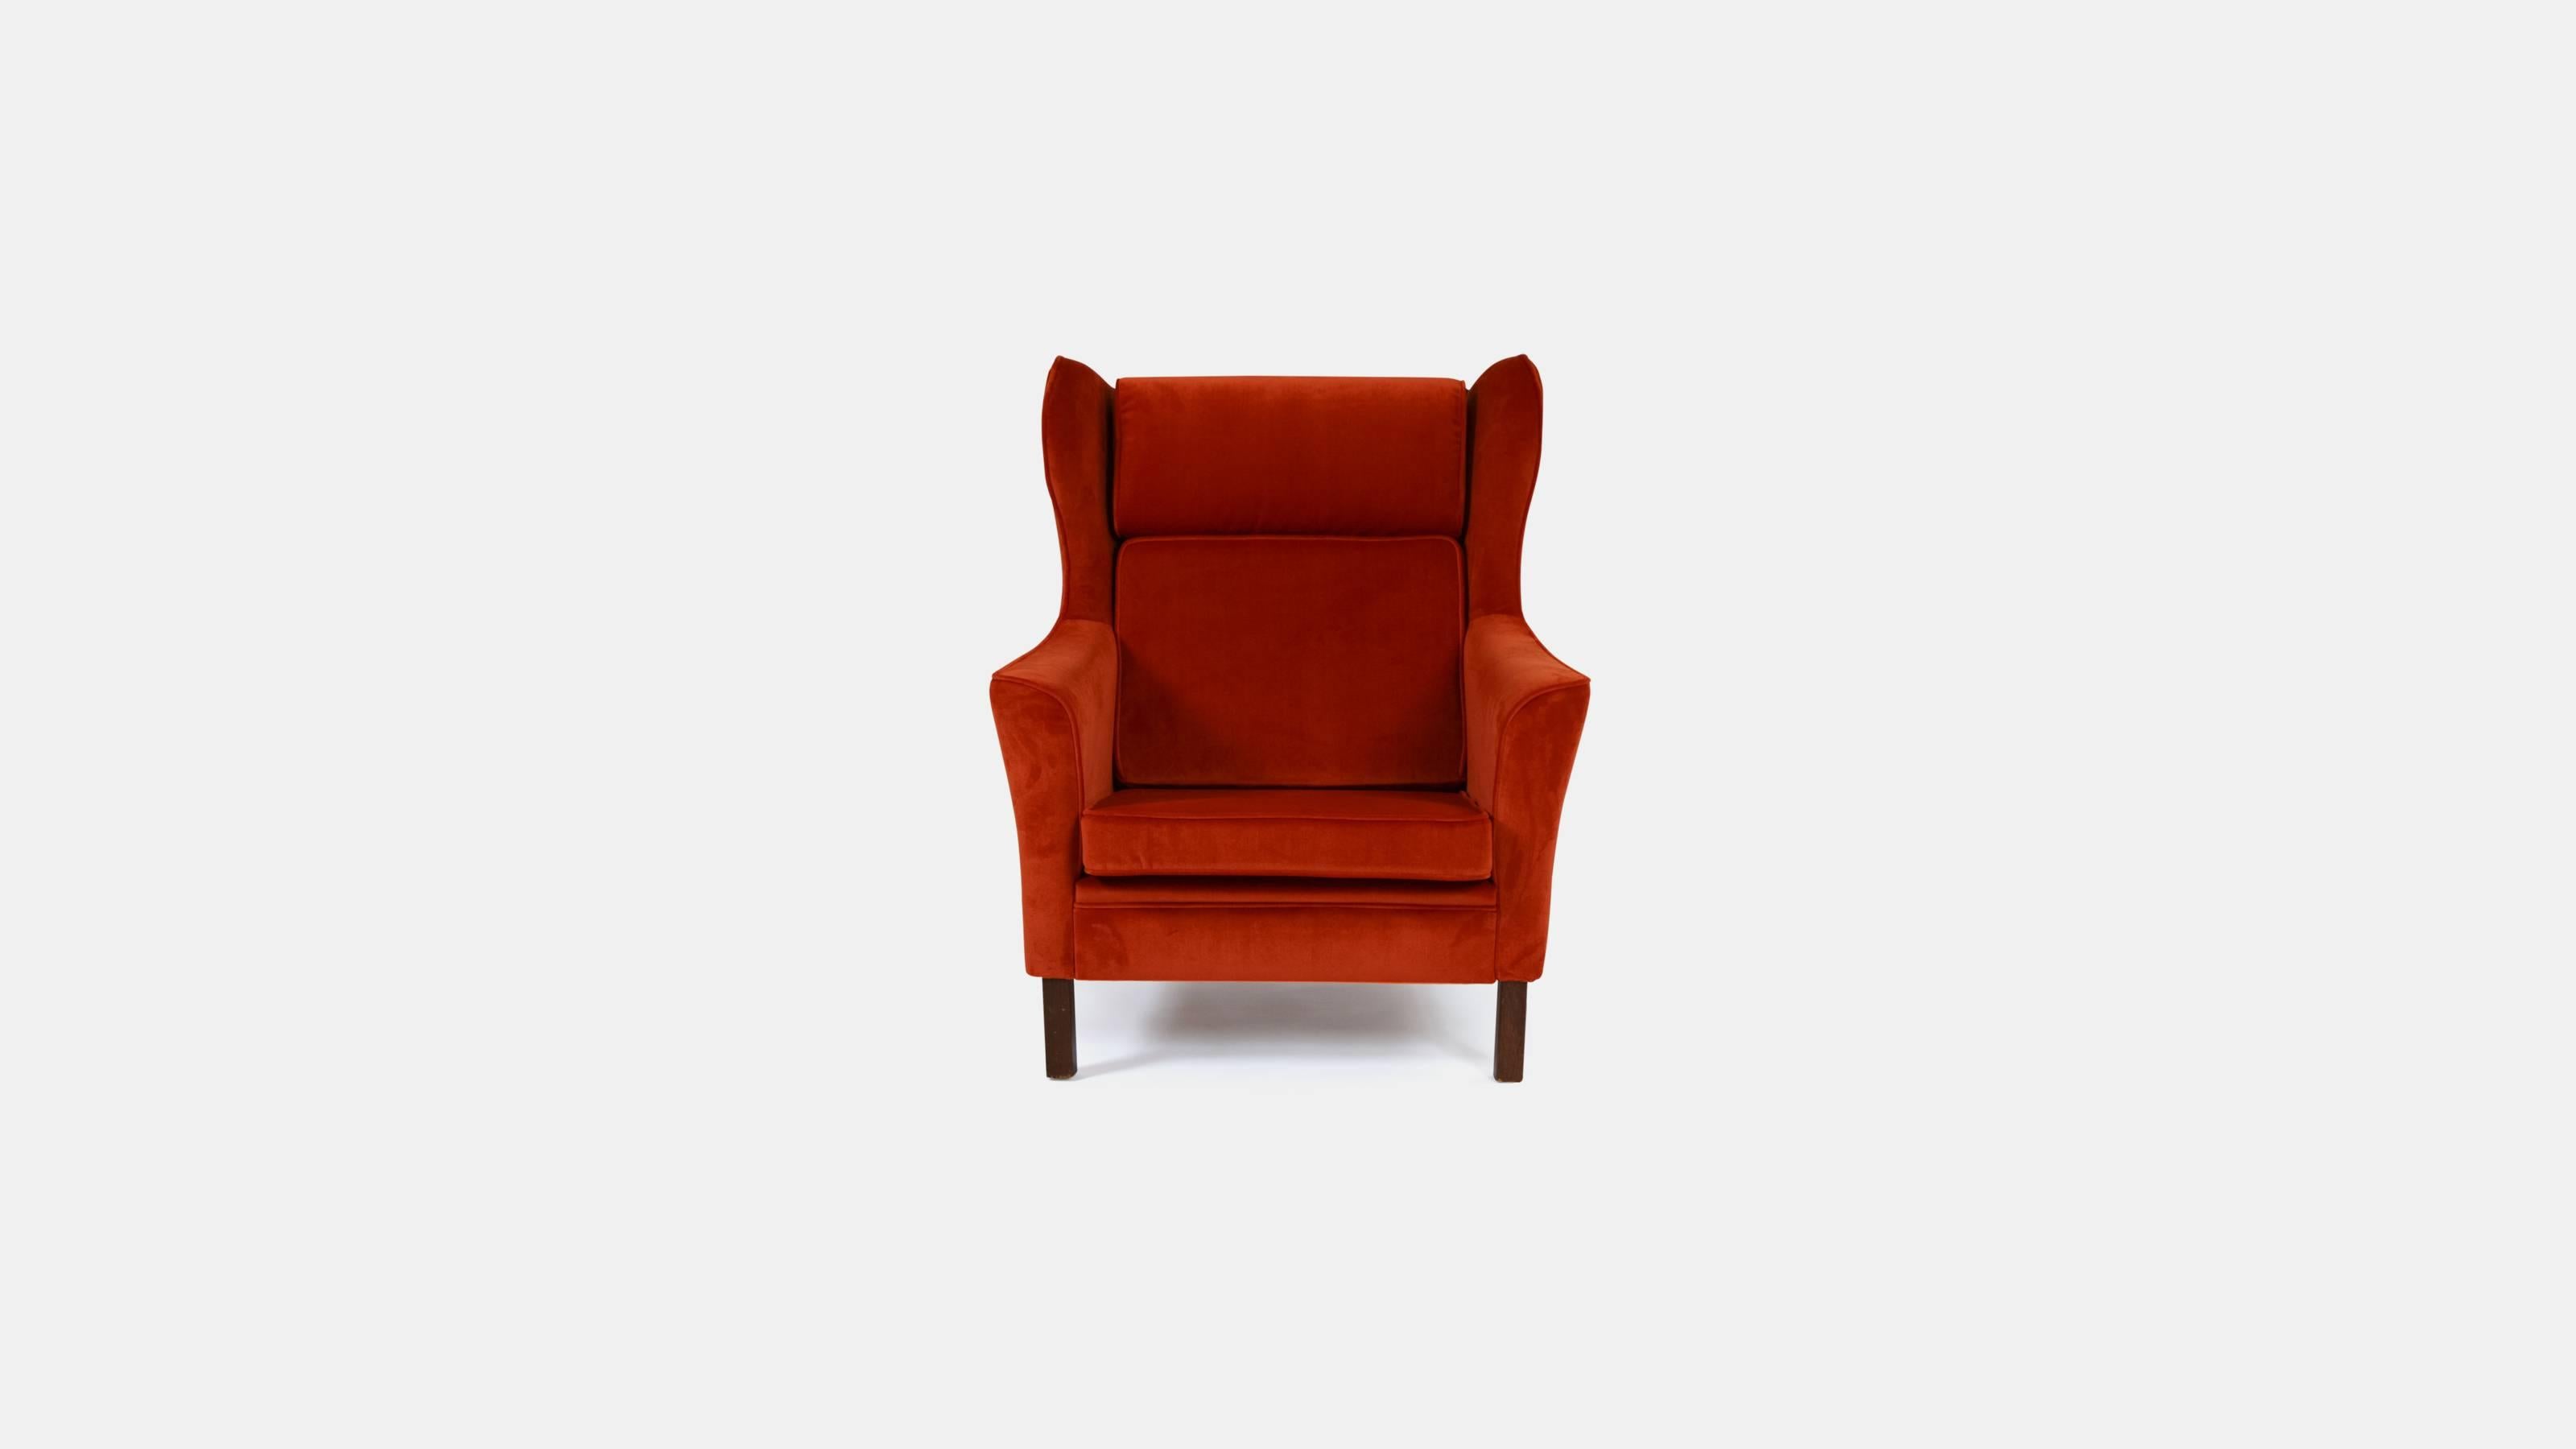 Stunning pair of 1970s Danish wingback lounge armchairs on square straight feet and re-upholstered in orange velvet.

Perfect to accompany your sitting room sofa or hallway. Need a flash of color? These are your chairs!

Get a midcentury look